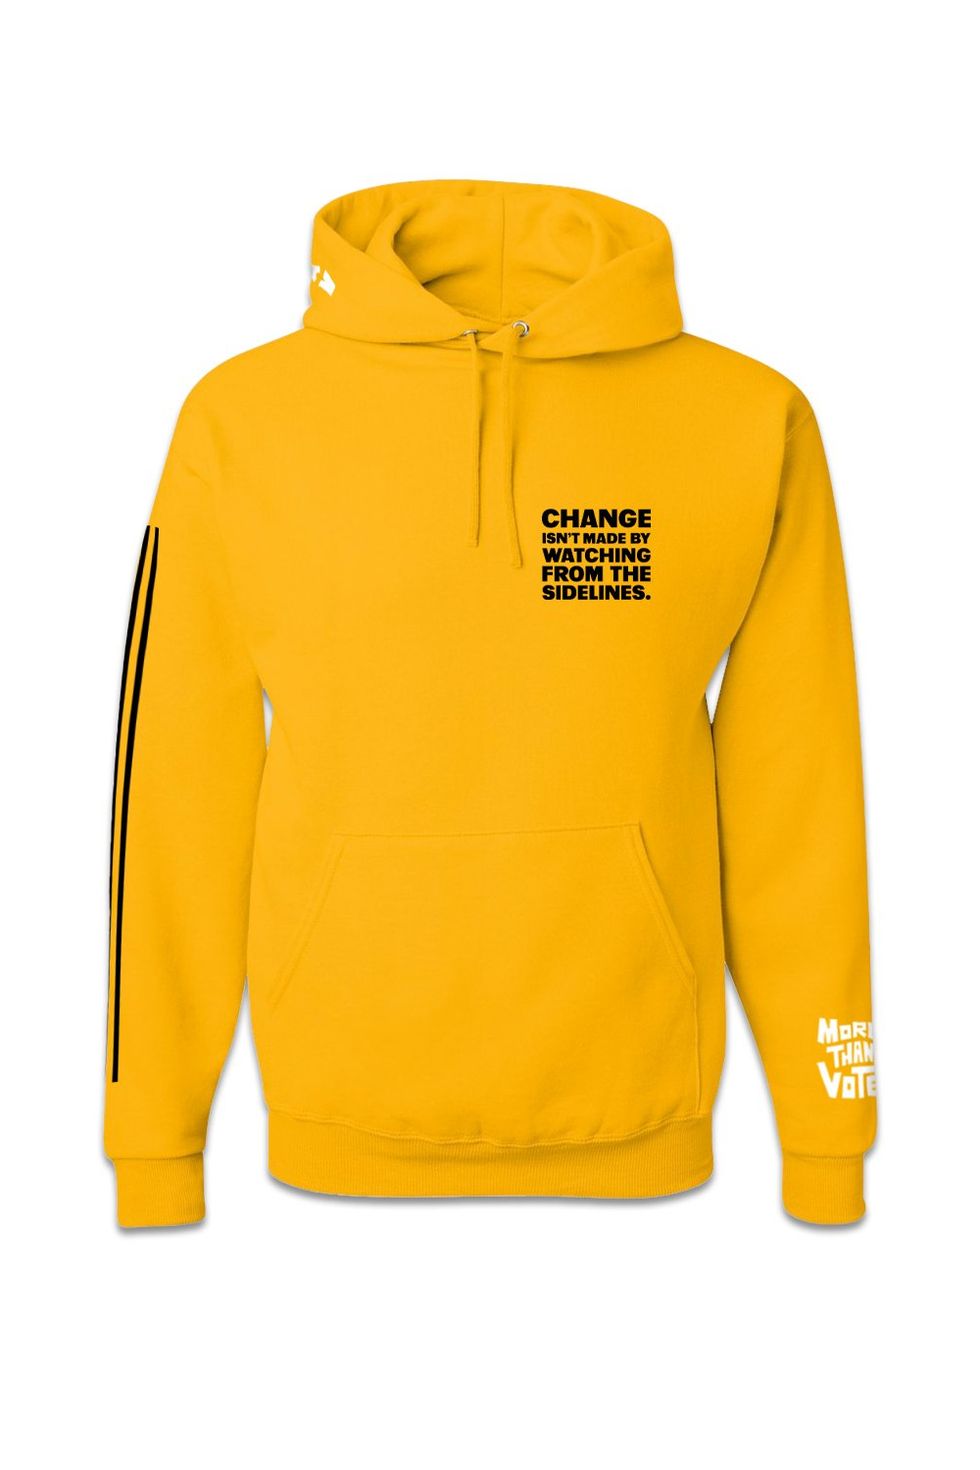 From The Sidelines Hoodie